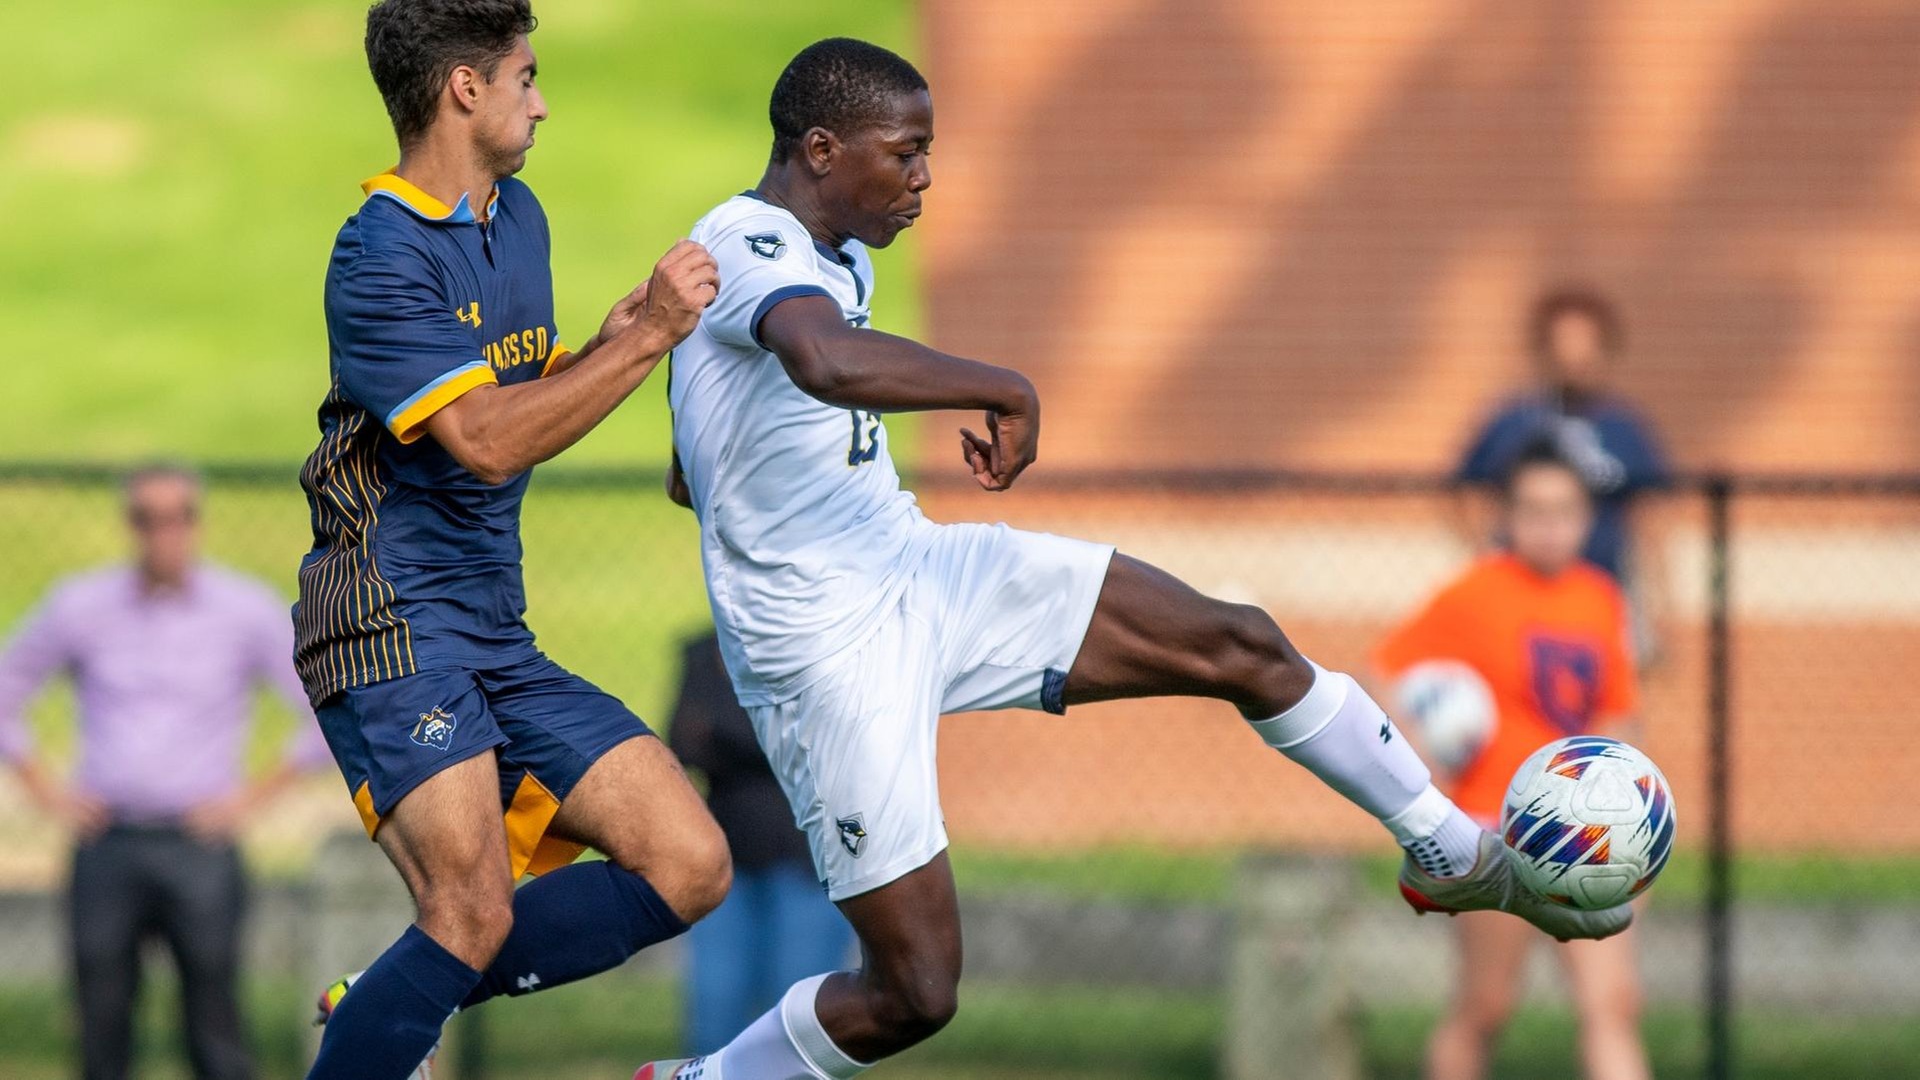 Men's Soccer Outlasts SUNY Poly, Earns Season-Opening Victory, 5-3